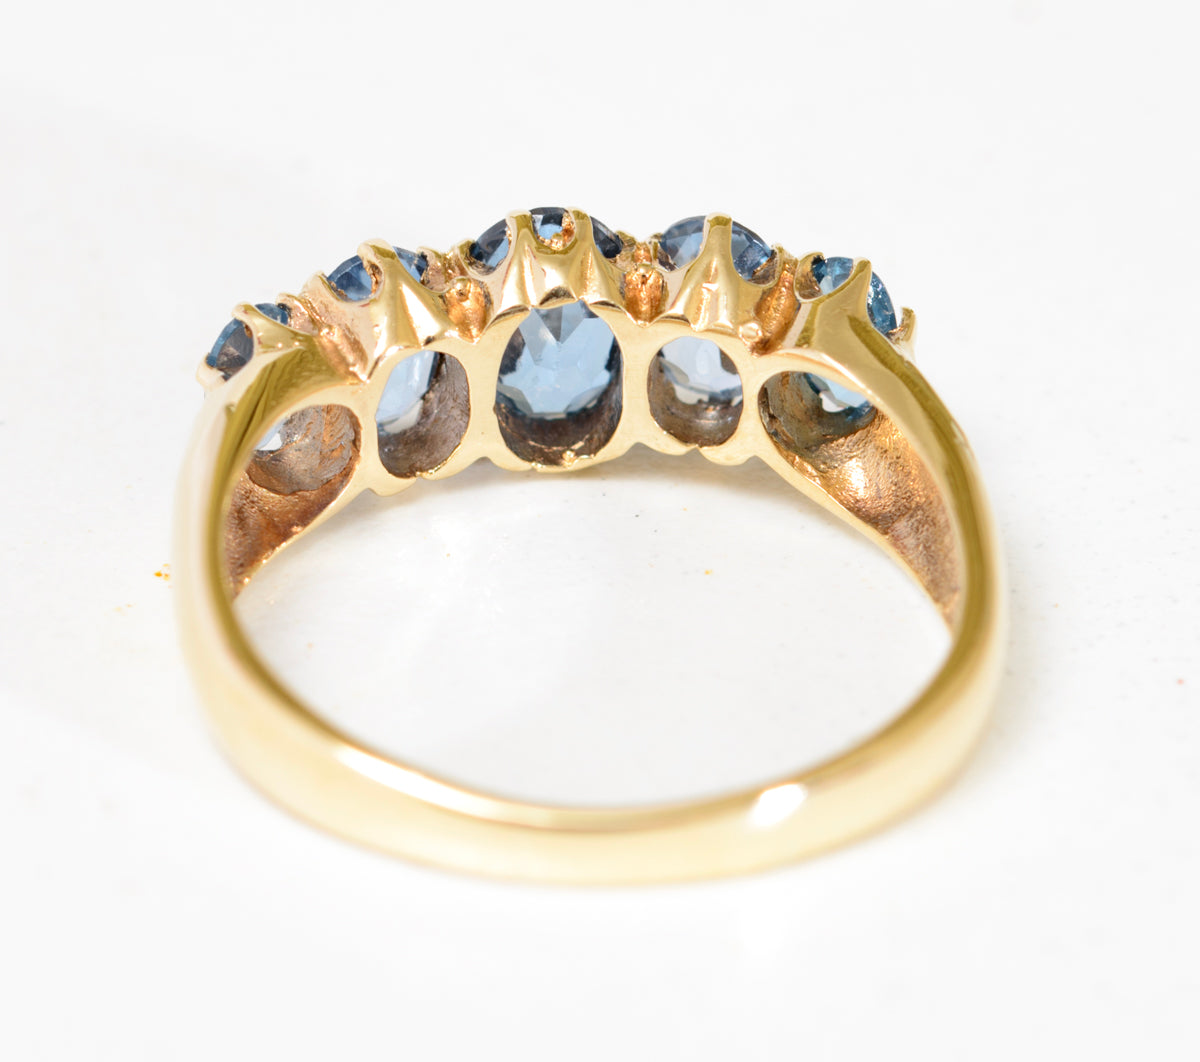 Vintage 9ct Gold Five Stone Classic Ring With Natural Blue Topaz Gemstone (A1777)